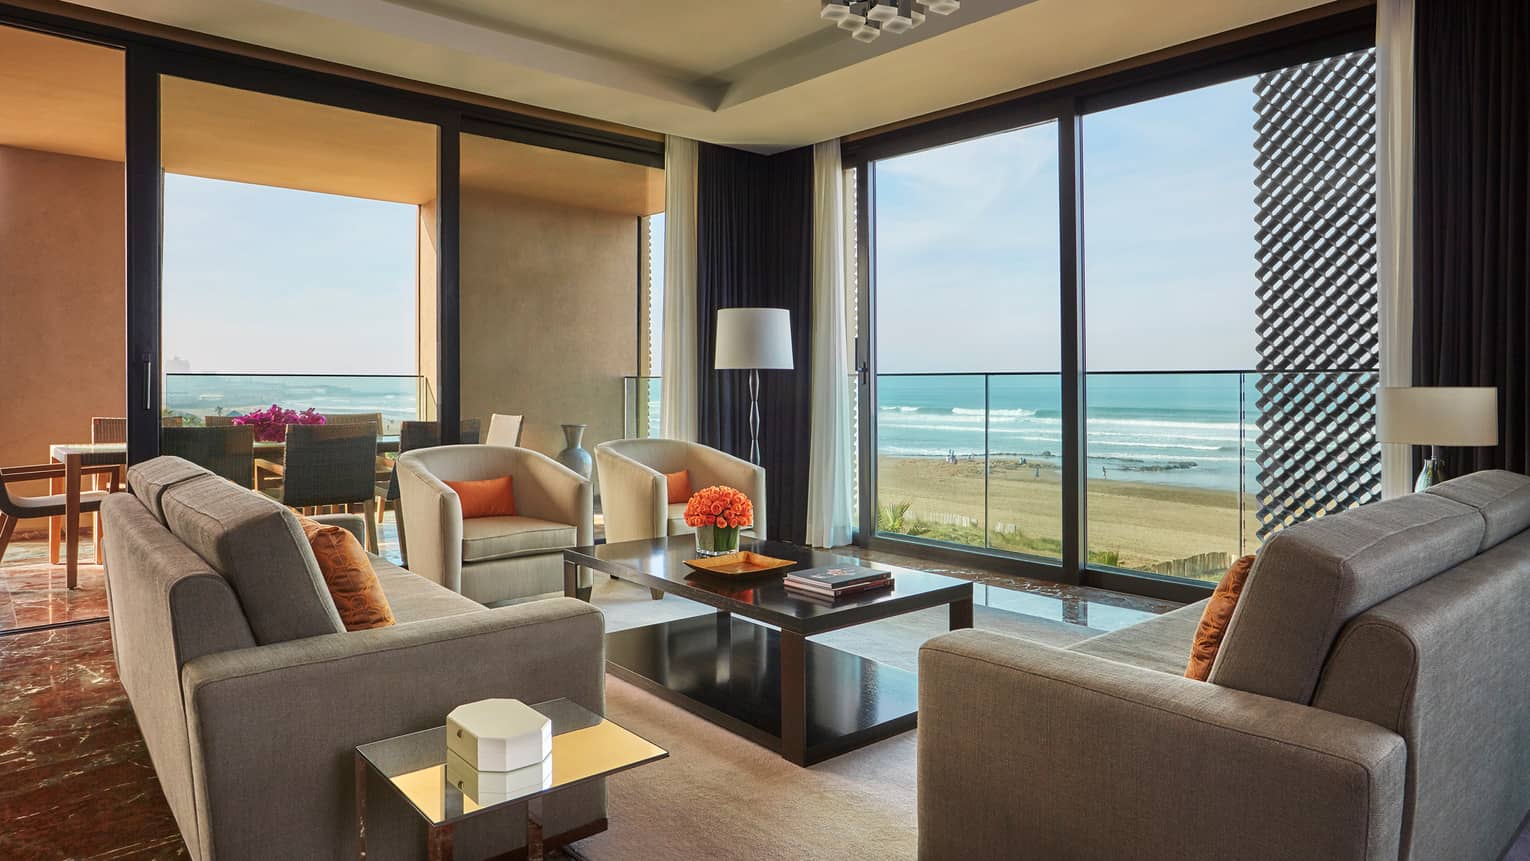 Imperial Suite Ocean View living room sofas, armchairs, corner windows with view of beach, Atlantic